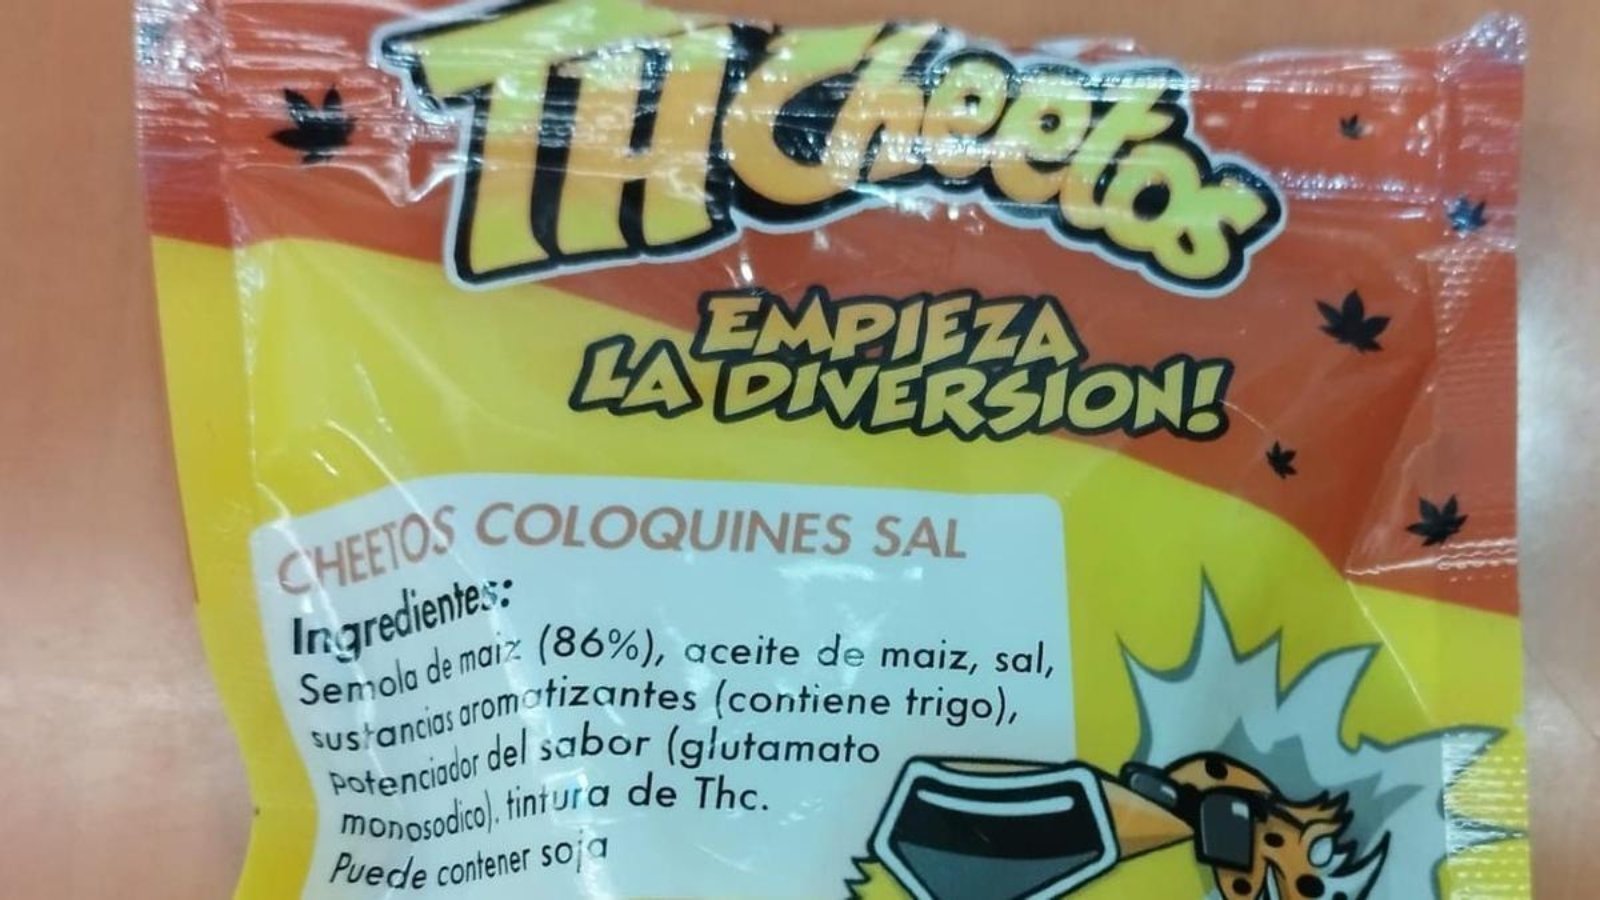 Mum Arrested After Toddler Eats Cannabis Laced Cheetos In Spain's Costa Blanca